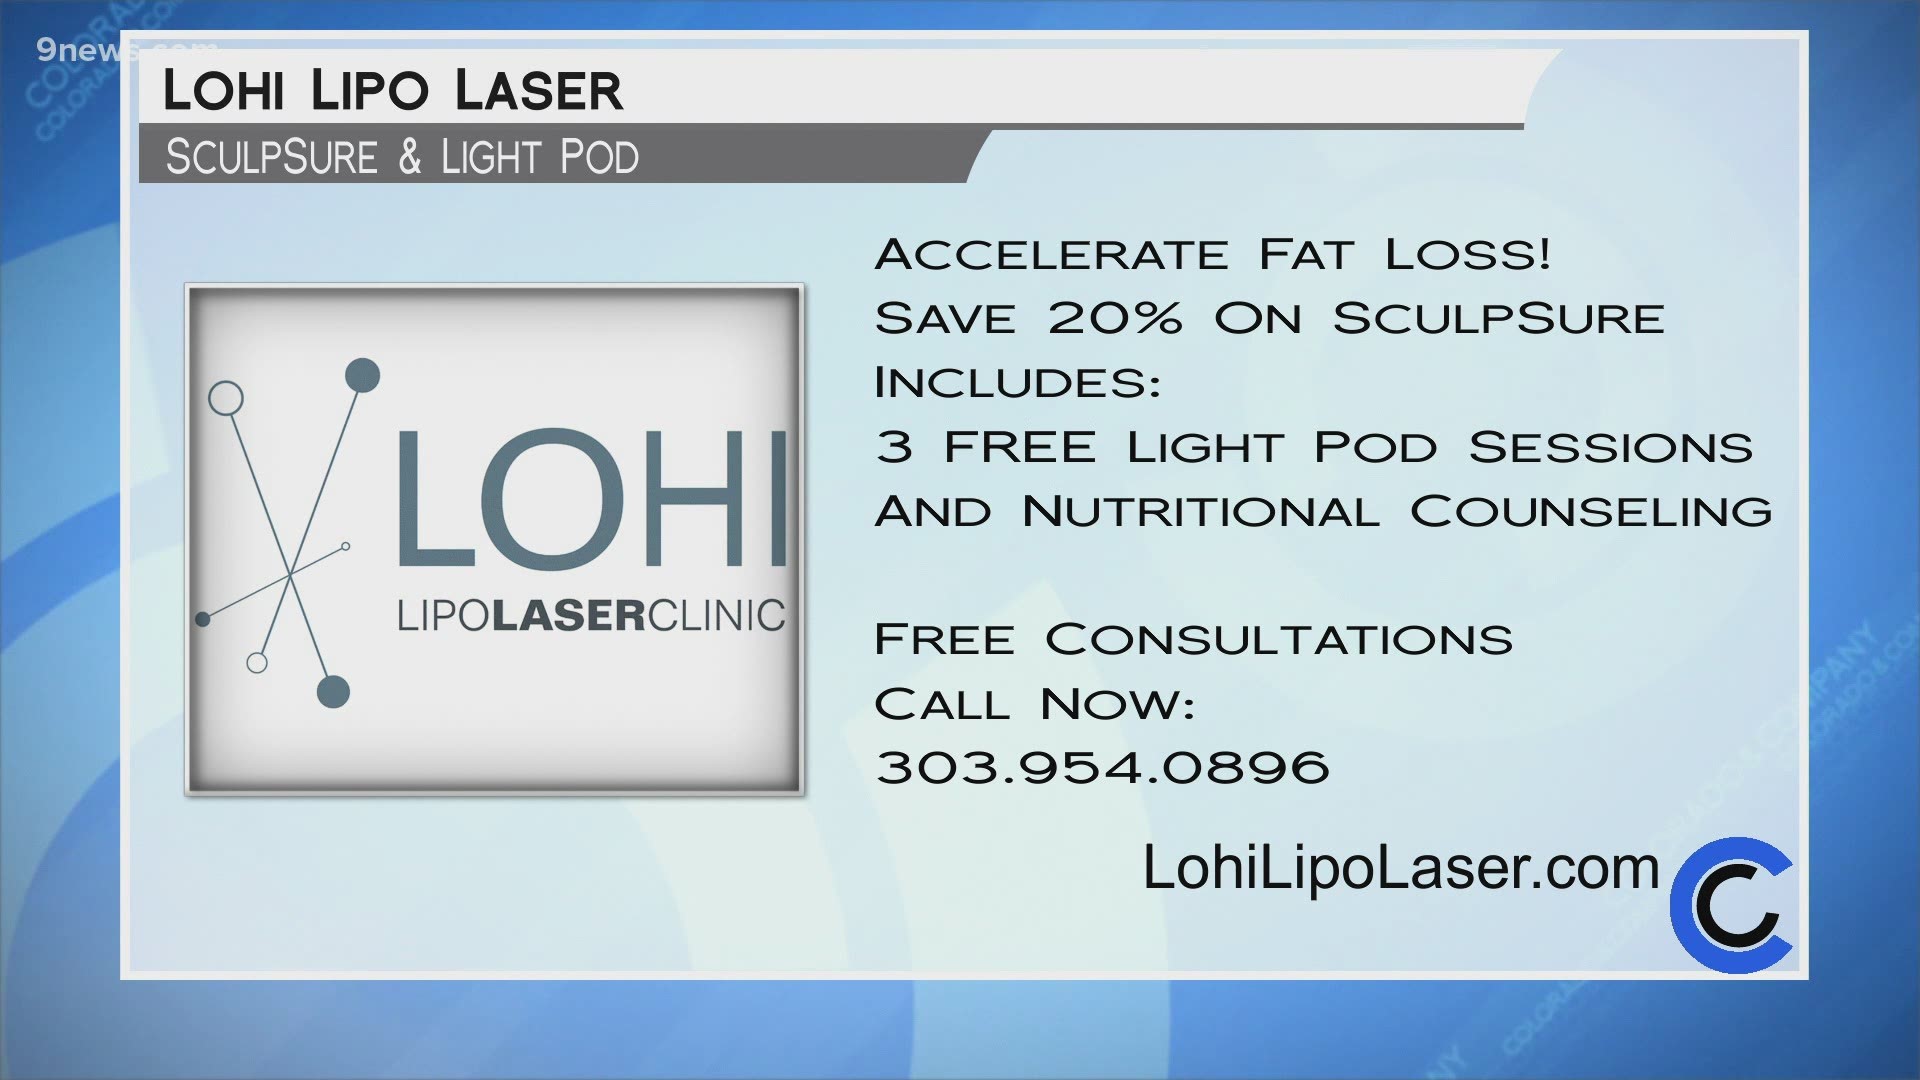 Try SculpSure for 20% off and get free nutritional counseling and light pod sessions, too! Call 303.954.0896 or visit LohiLipoLaser.com to get started.